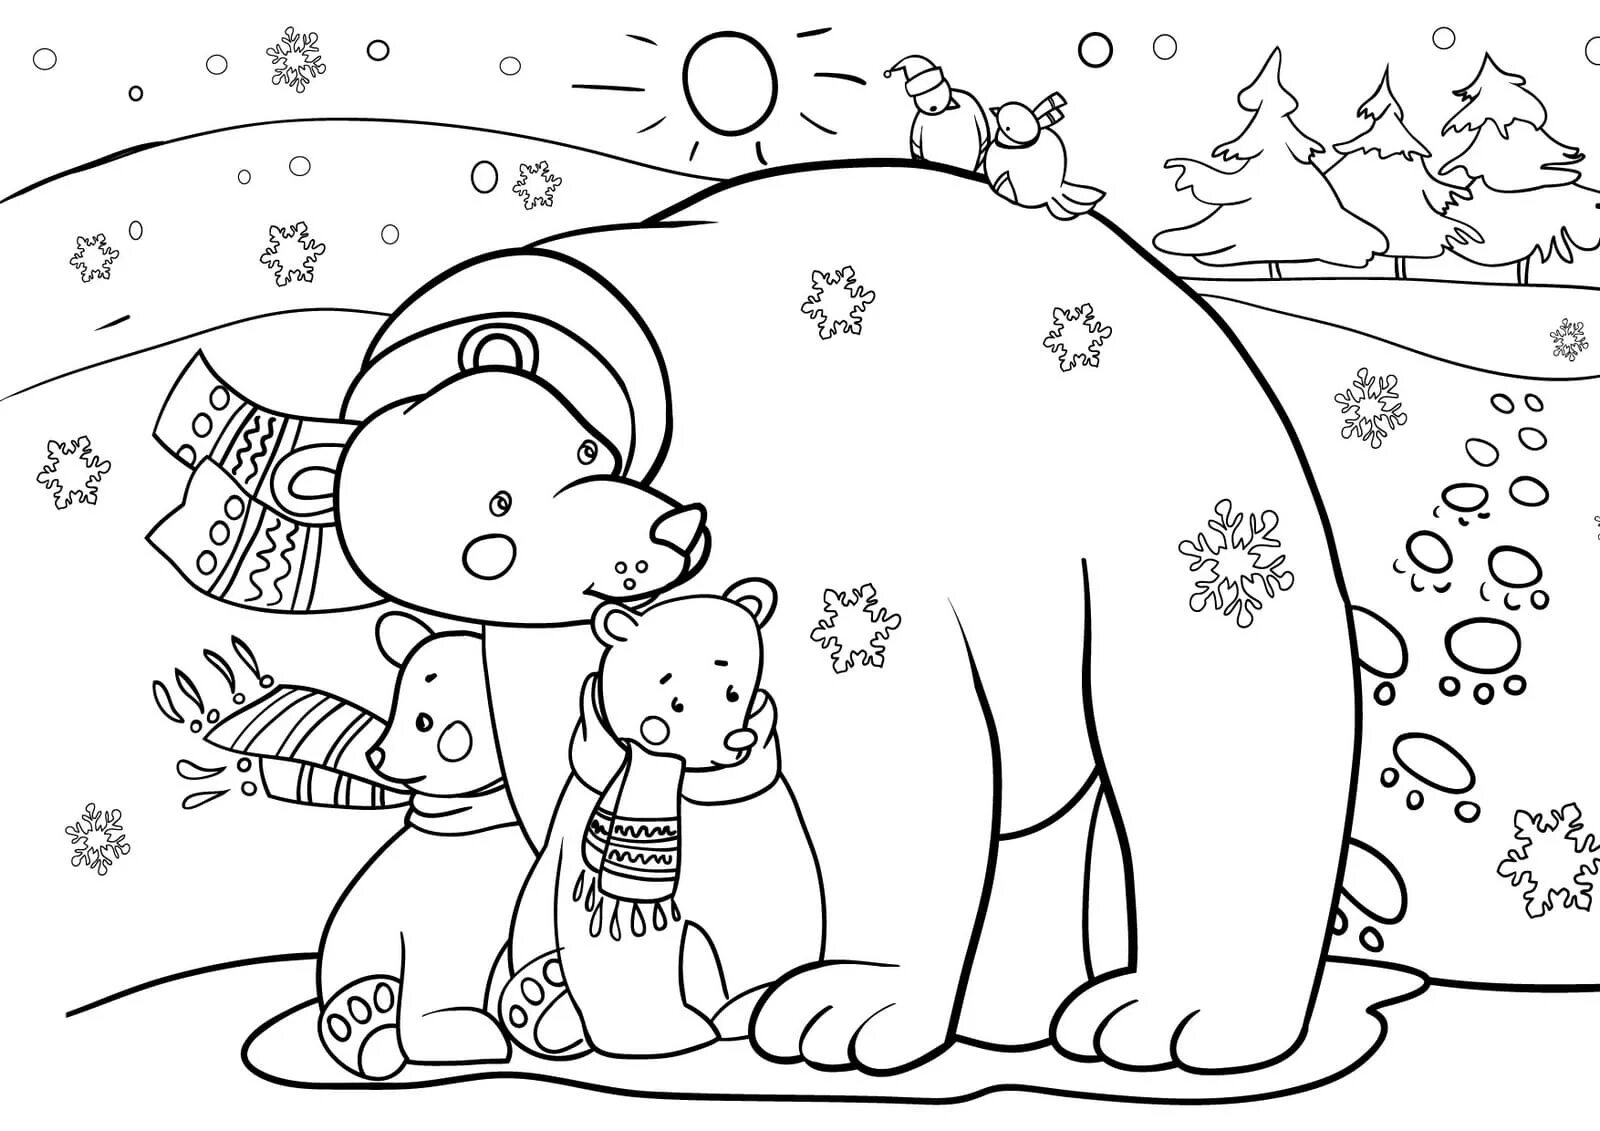 Coloring book snowflakes bear in winter